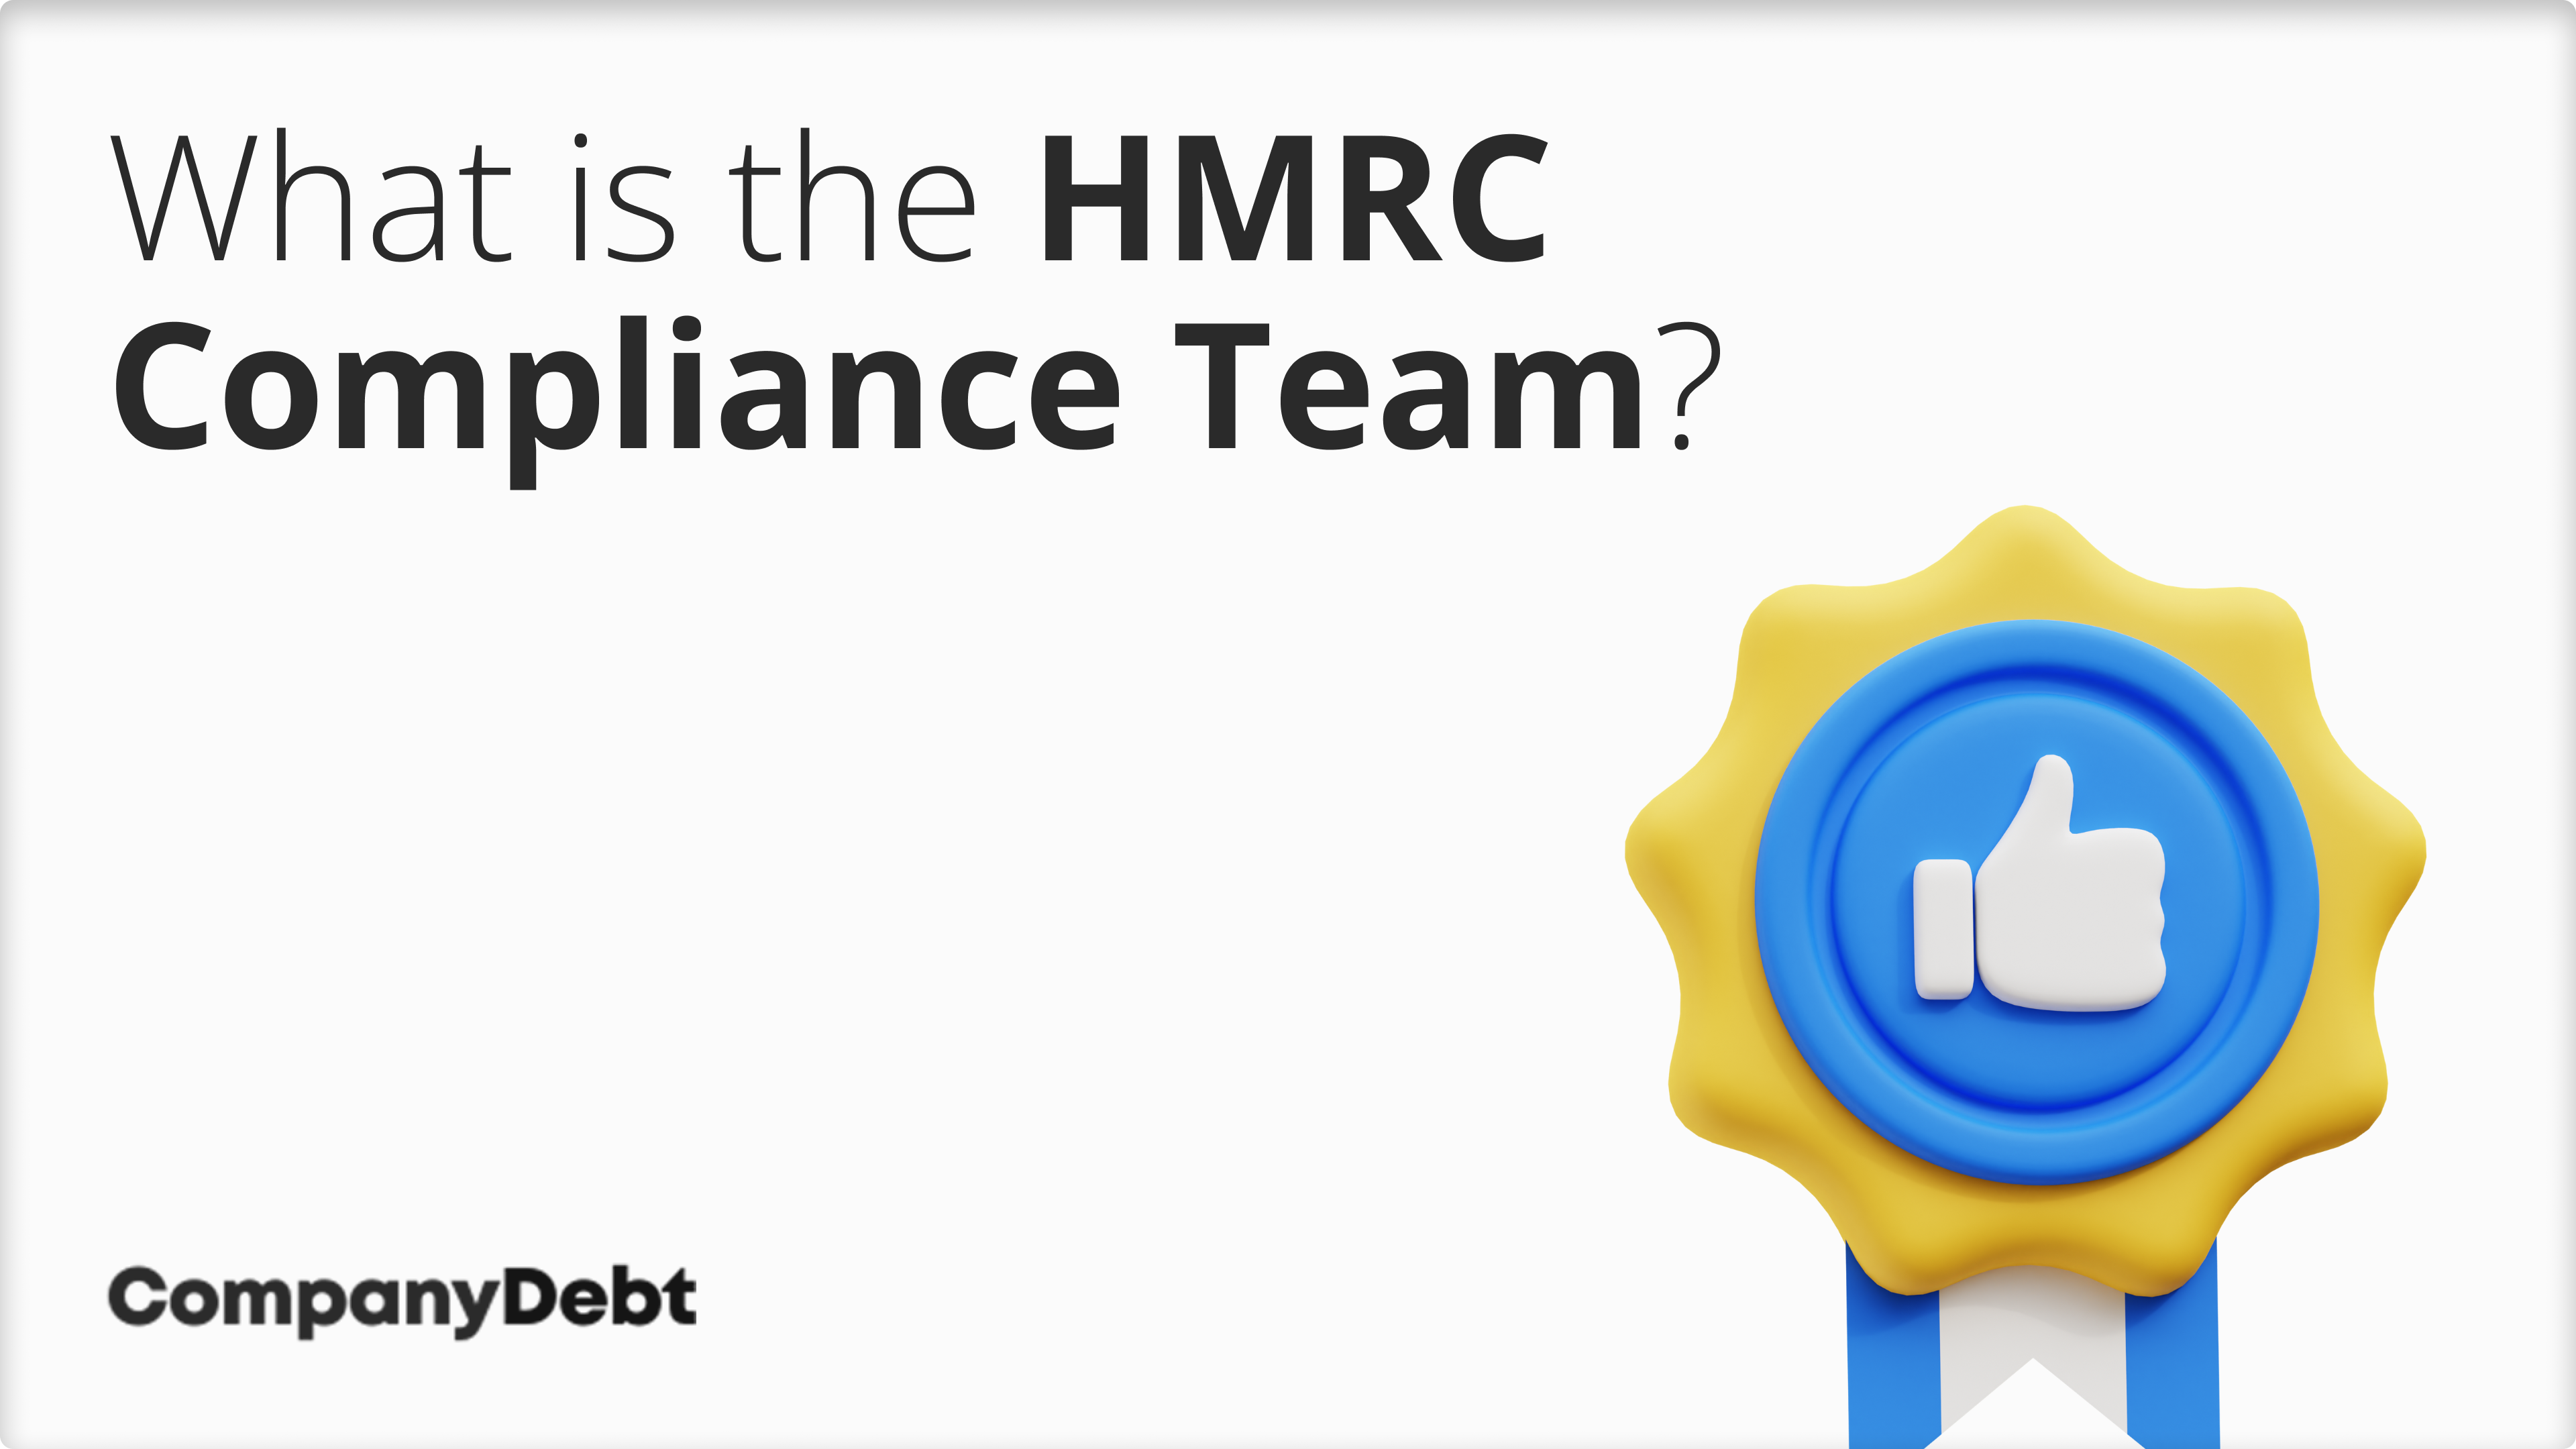 What is the HMRC Compliance Team and What do They Do?